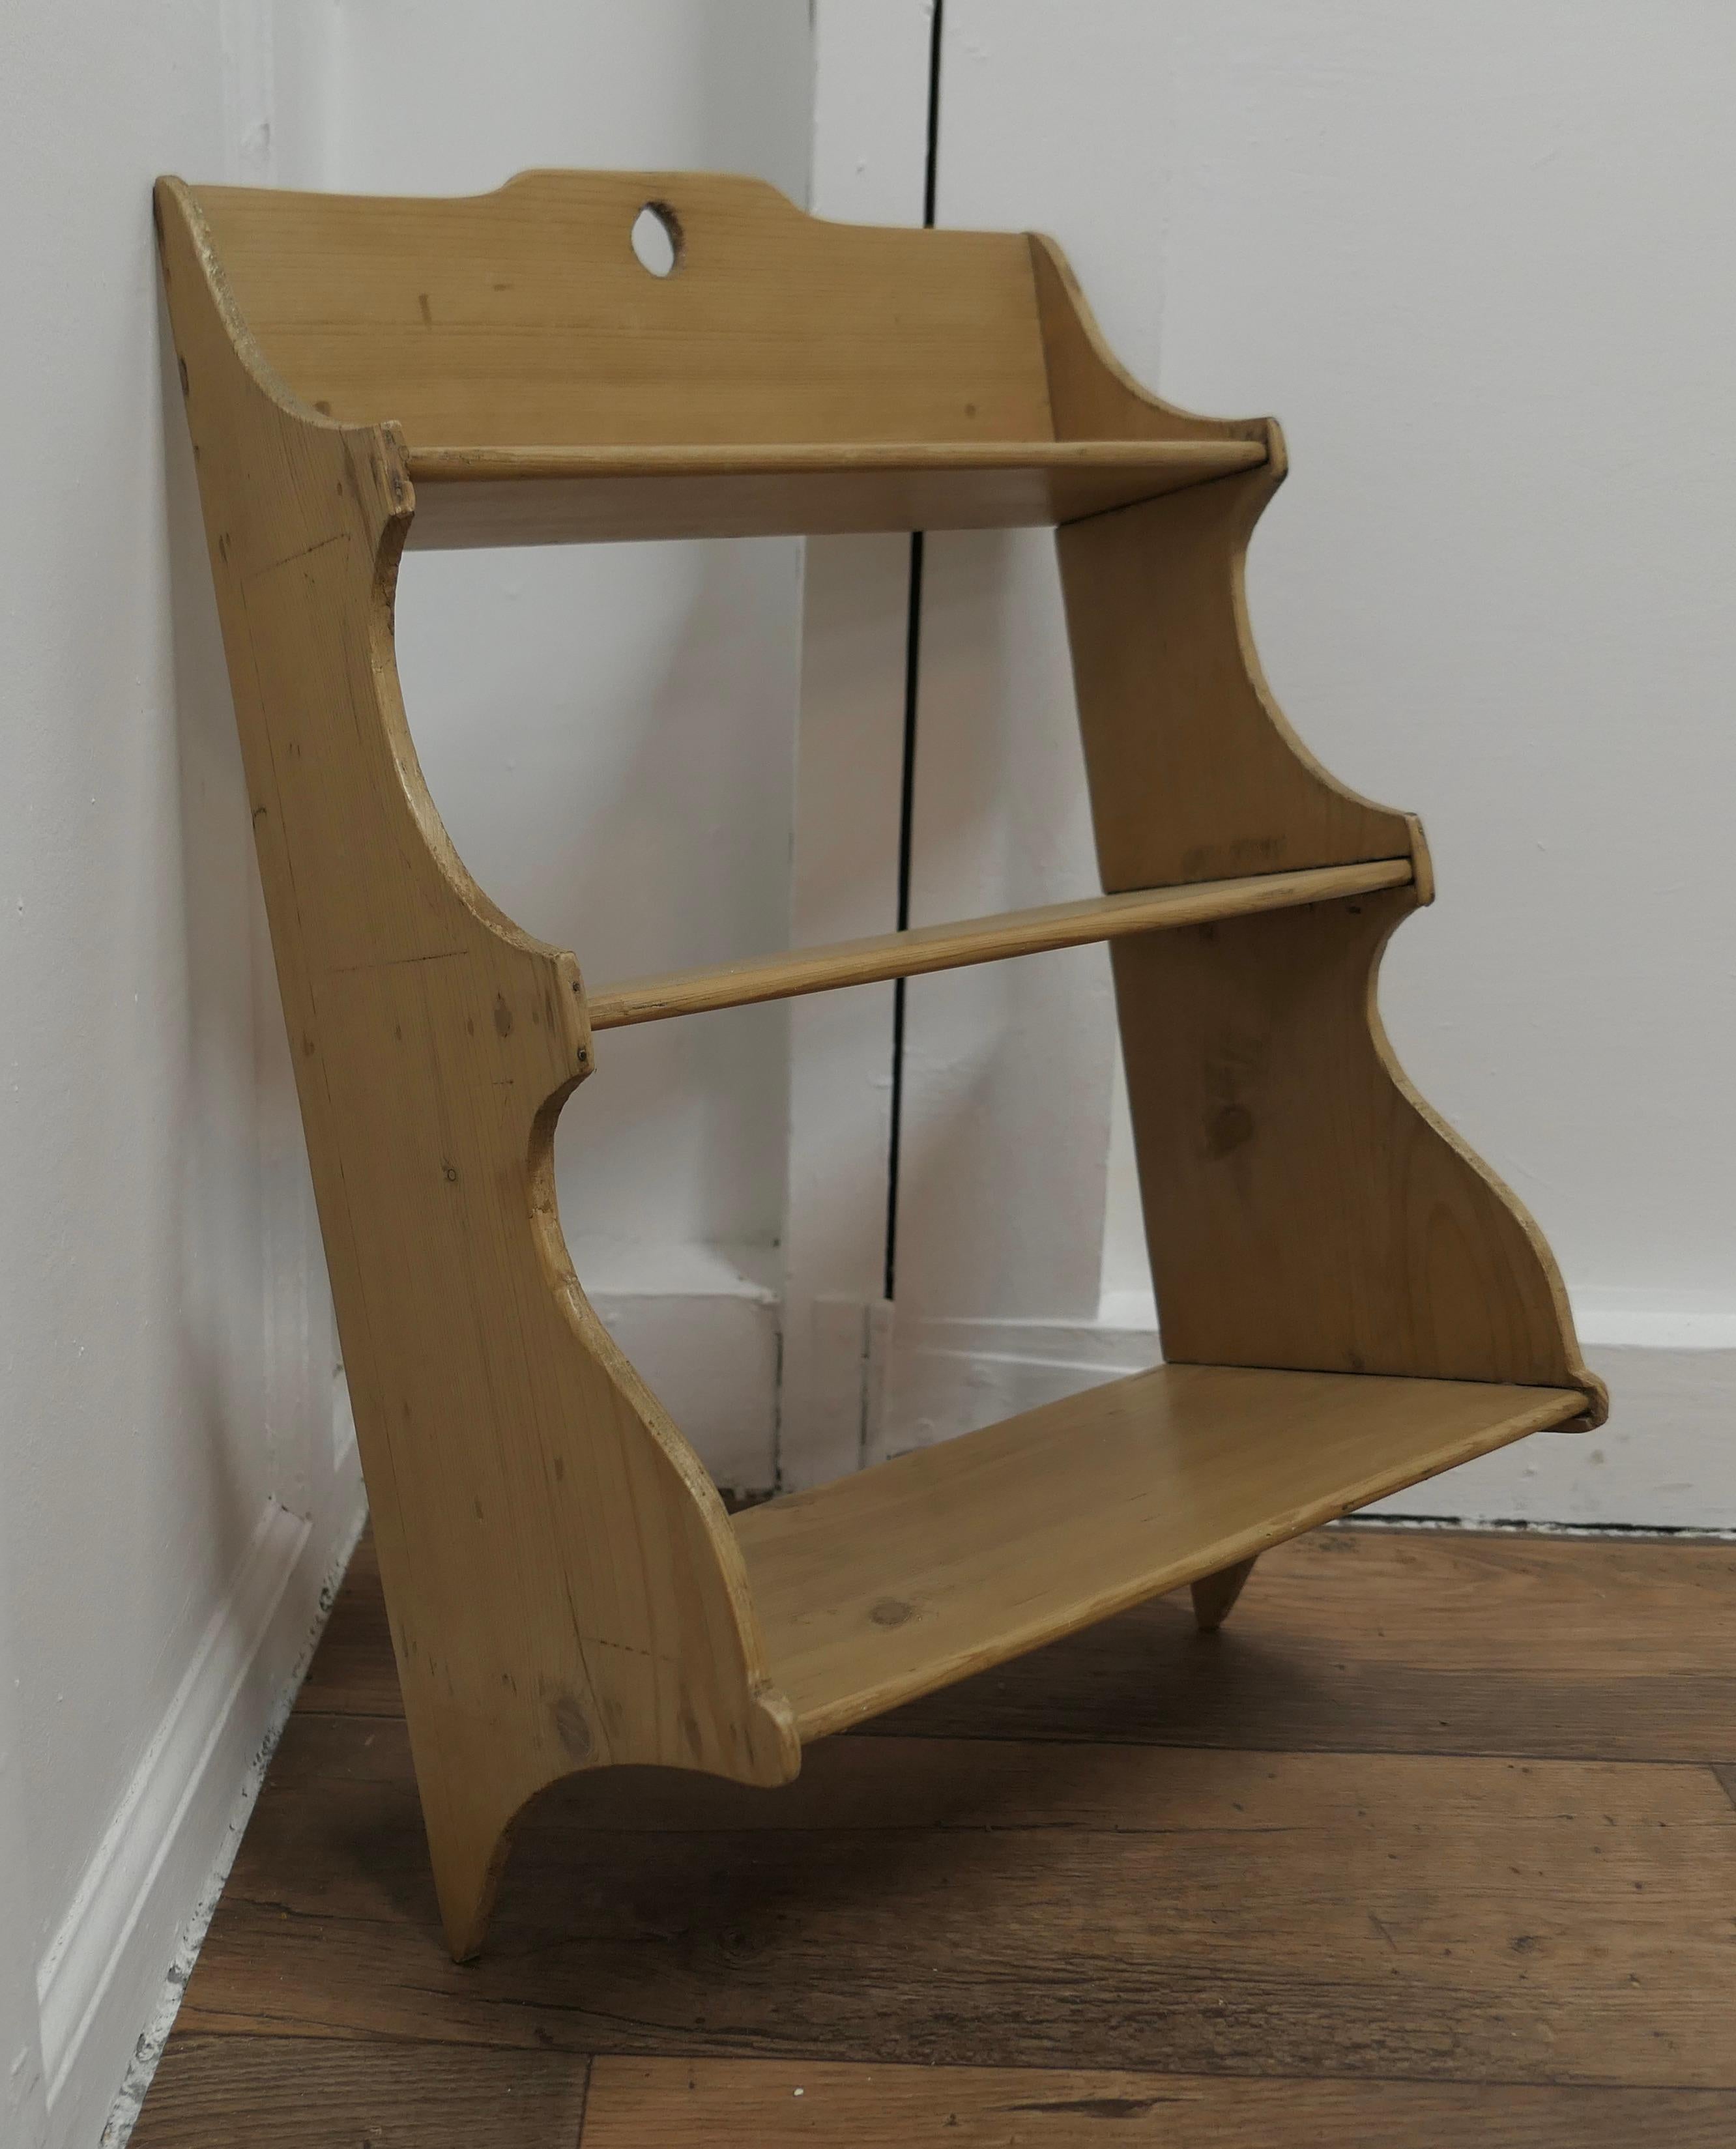 Late 19th Century Rustic Pine Wall Hanging Book Shelf For Sale